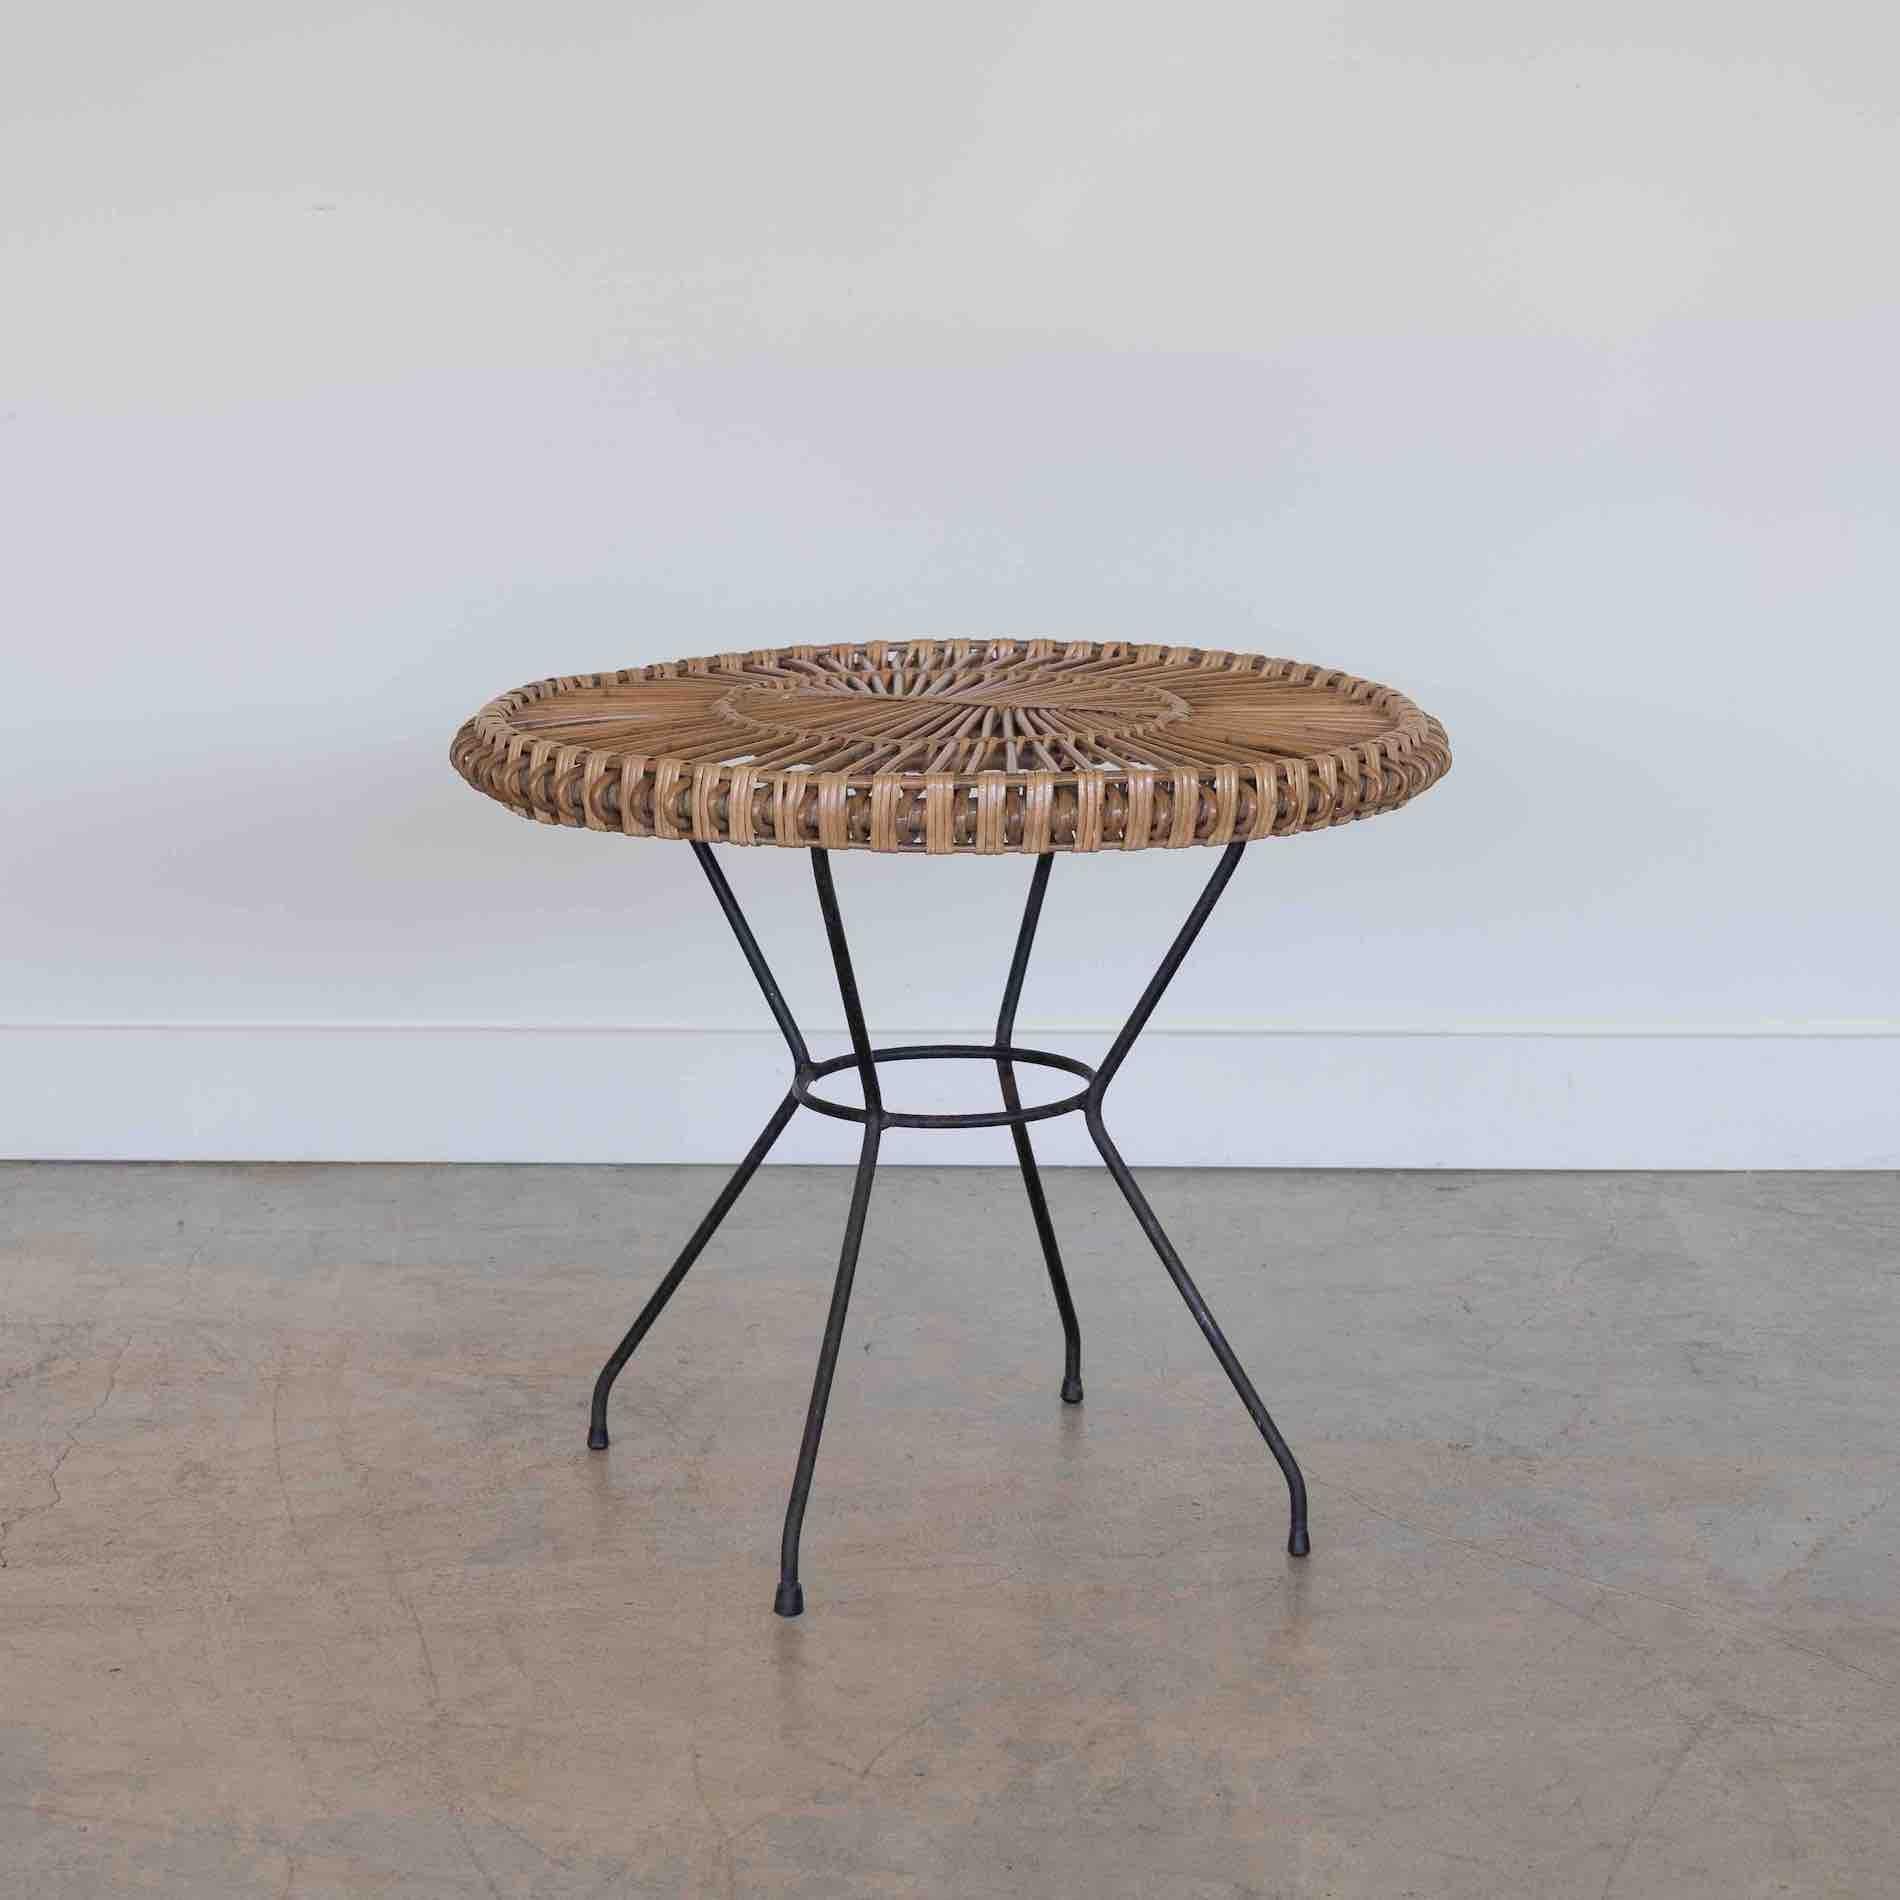 Stunning rattan side table from Italy, 1960's. Original rattan circular top with loop detail along edge. Iron frame with original black paint showing some signs of wear and age.